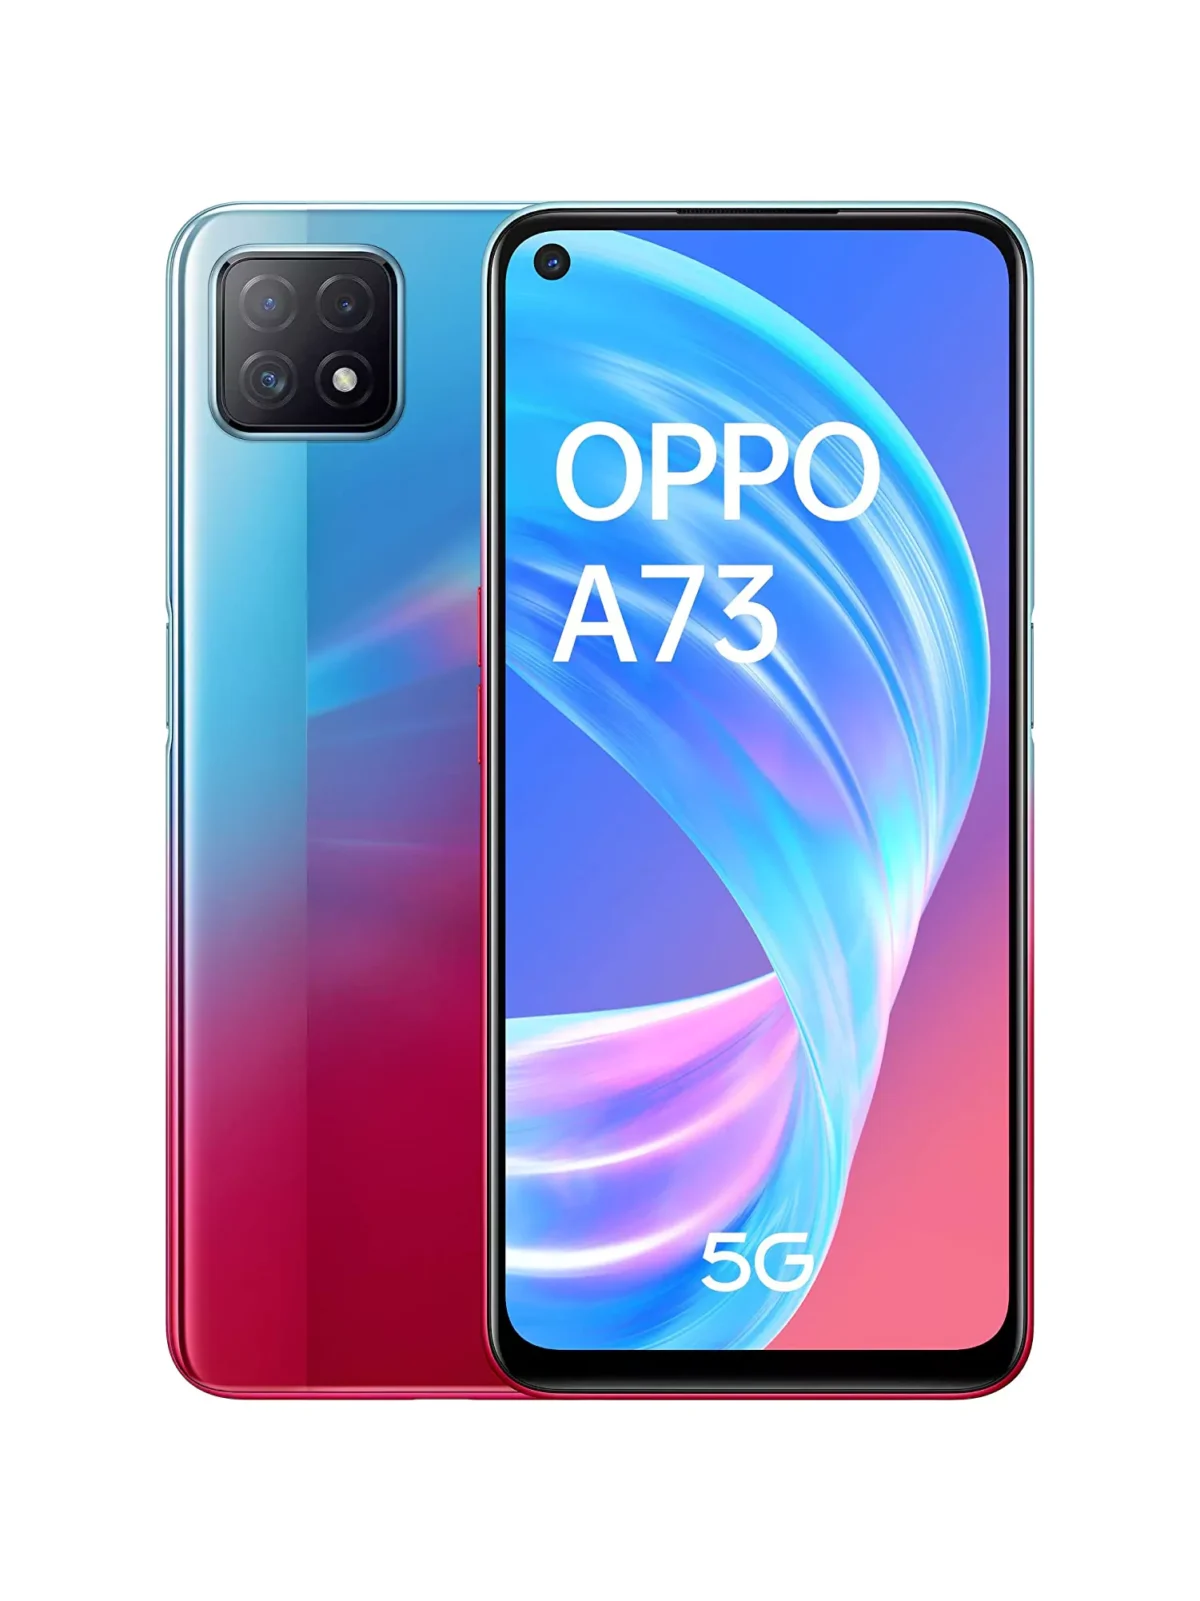 oppo a73 5g price in bangladesh